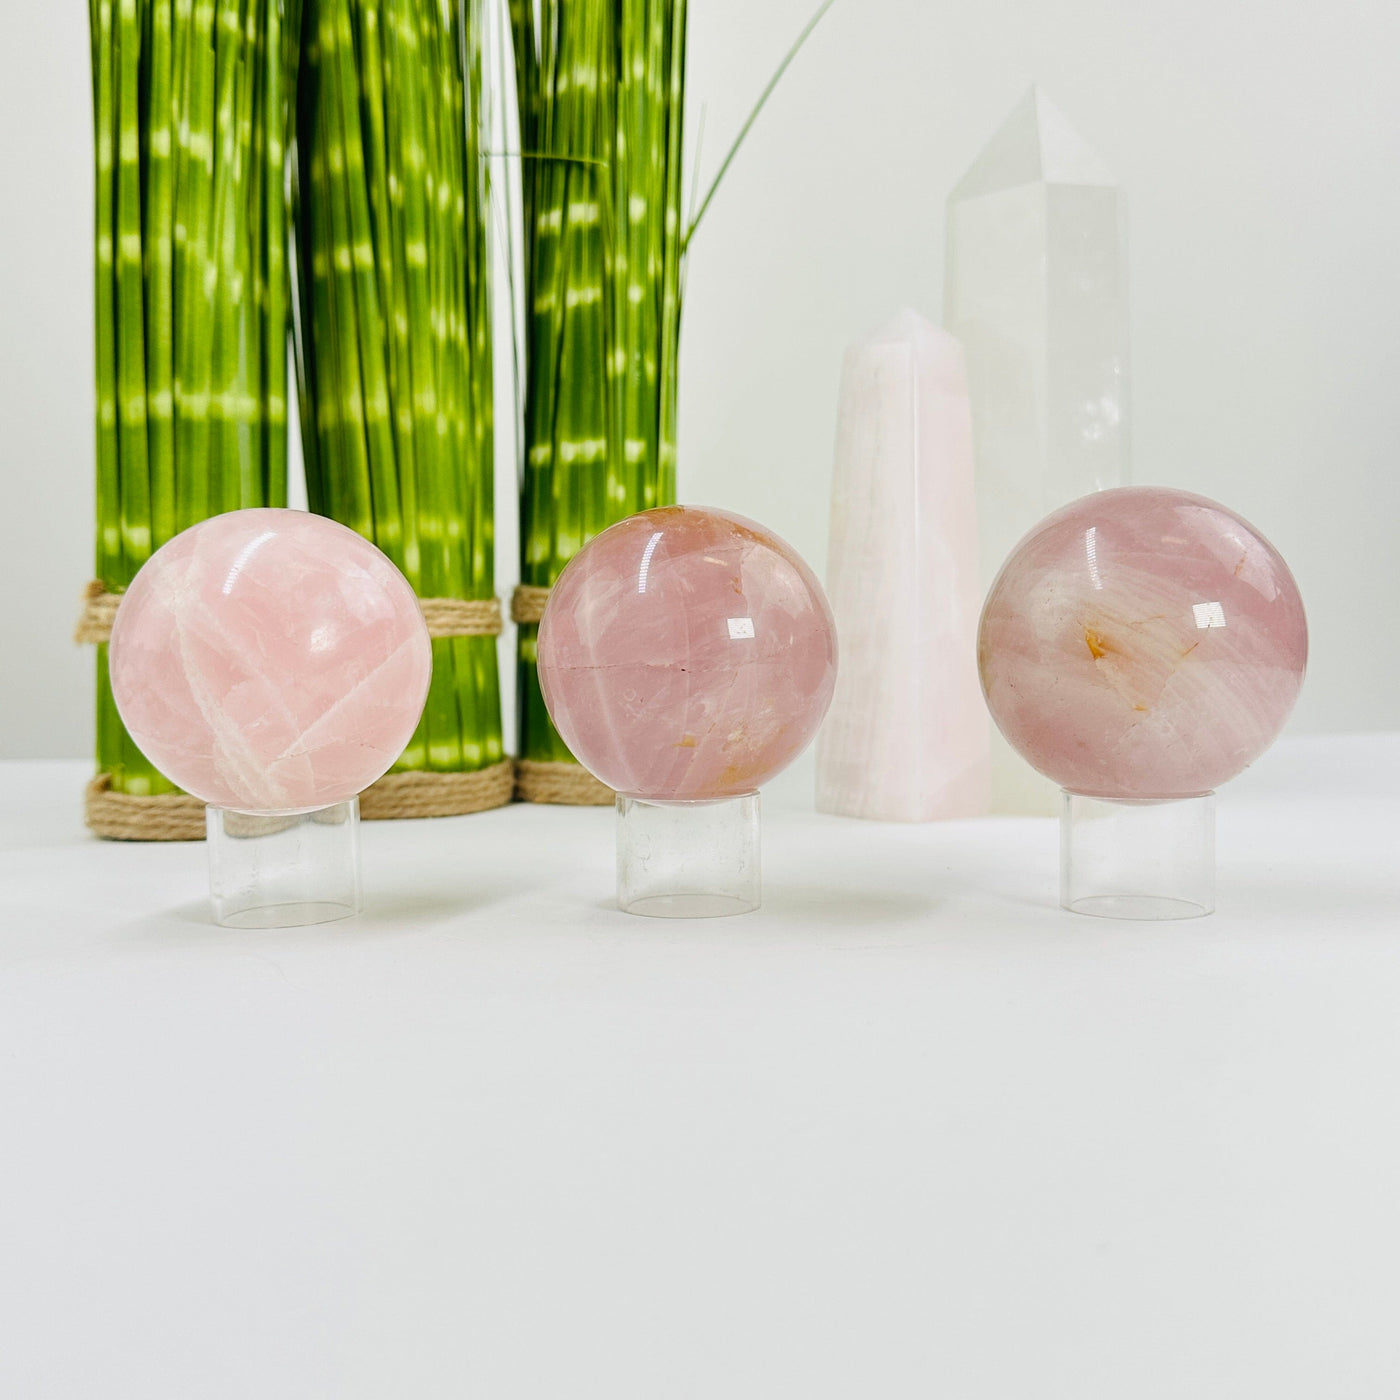 rose quartz spheres with decorations in the background